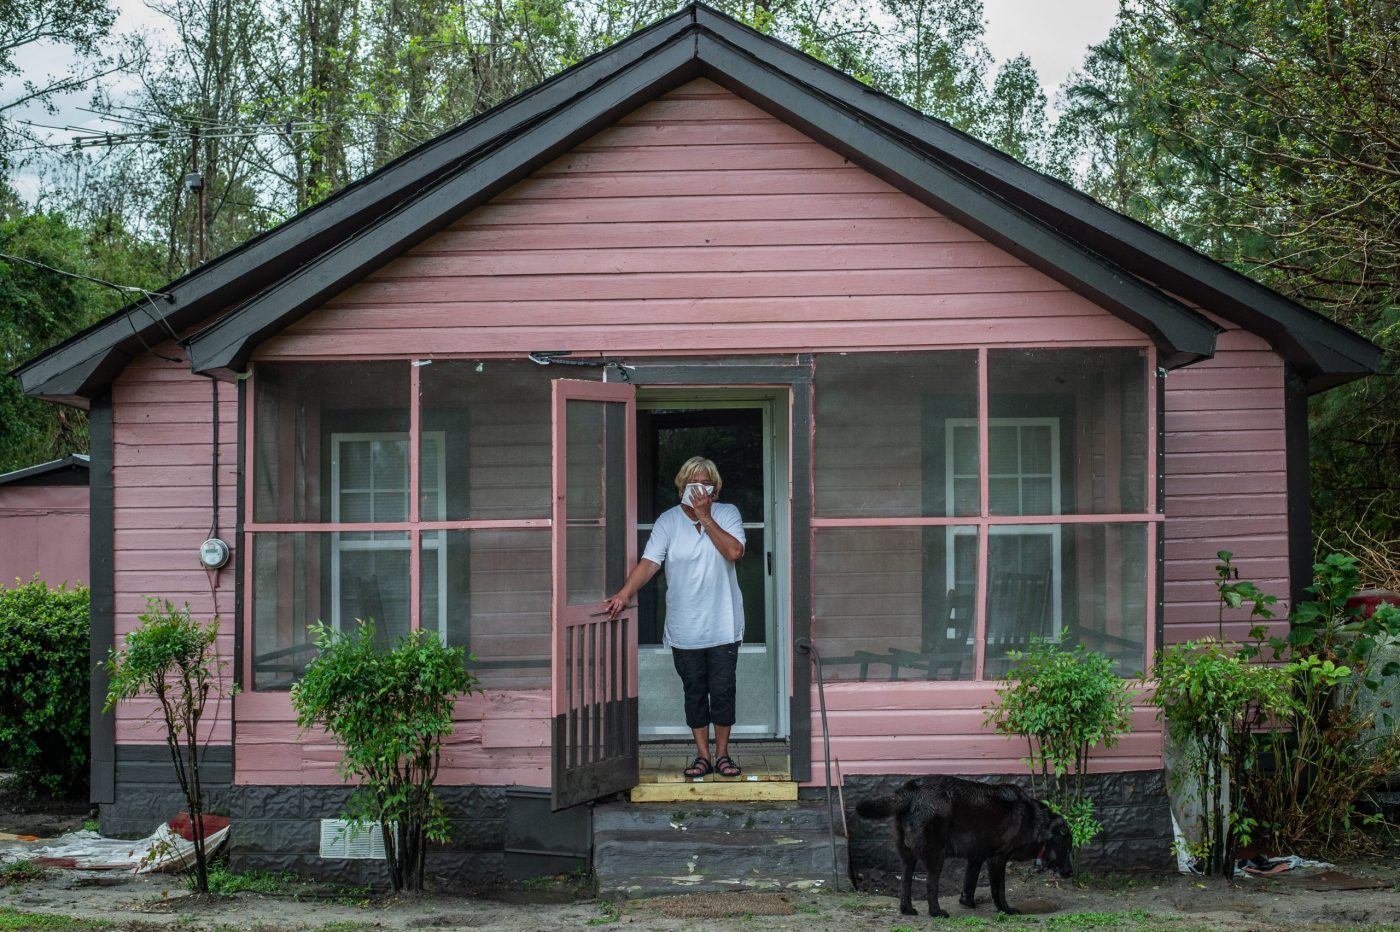 Vertical explainer photo 3 - Activist Elsie Herring, stands on the porch of her family home, holding a handkerchief over her mouth to filter out manure being sprayed on the field next door / Photo Credit: Jo-Anne McArthur / We Animals